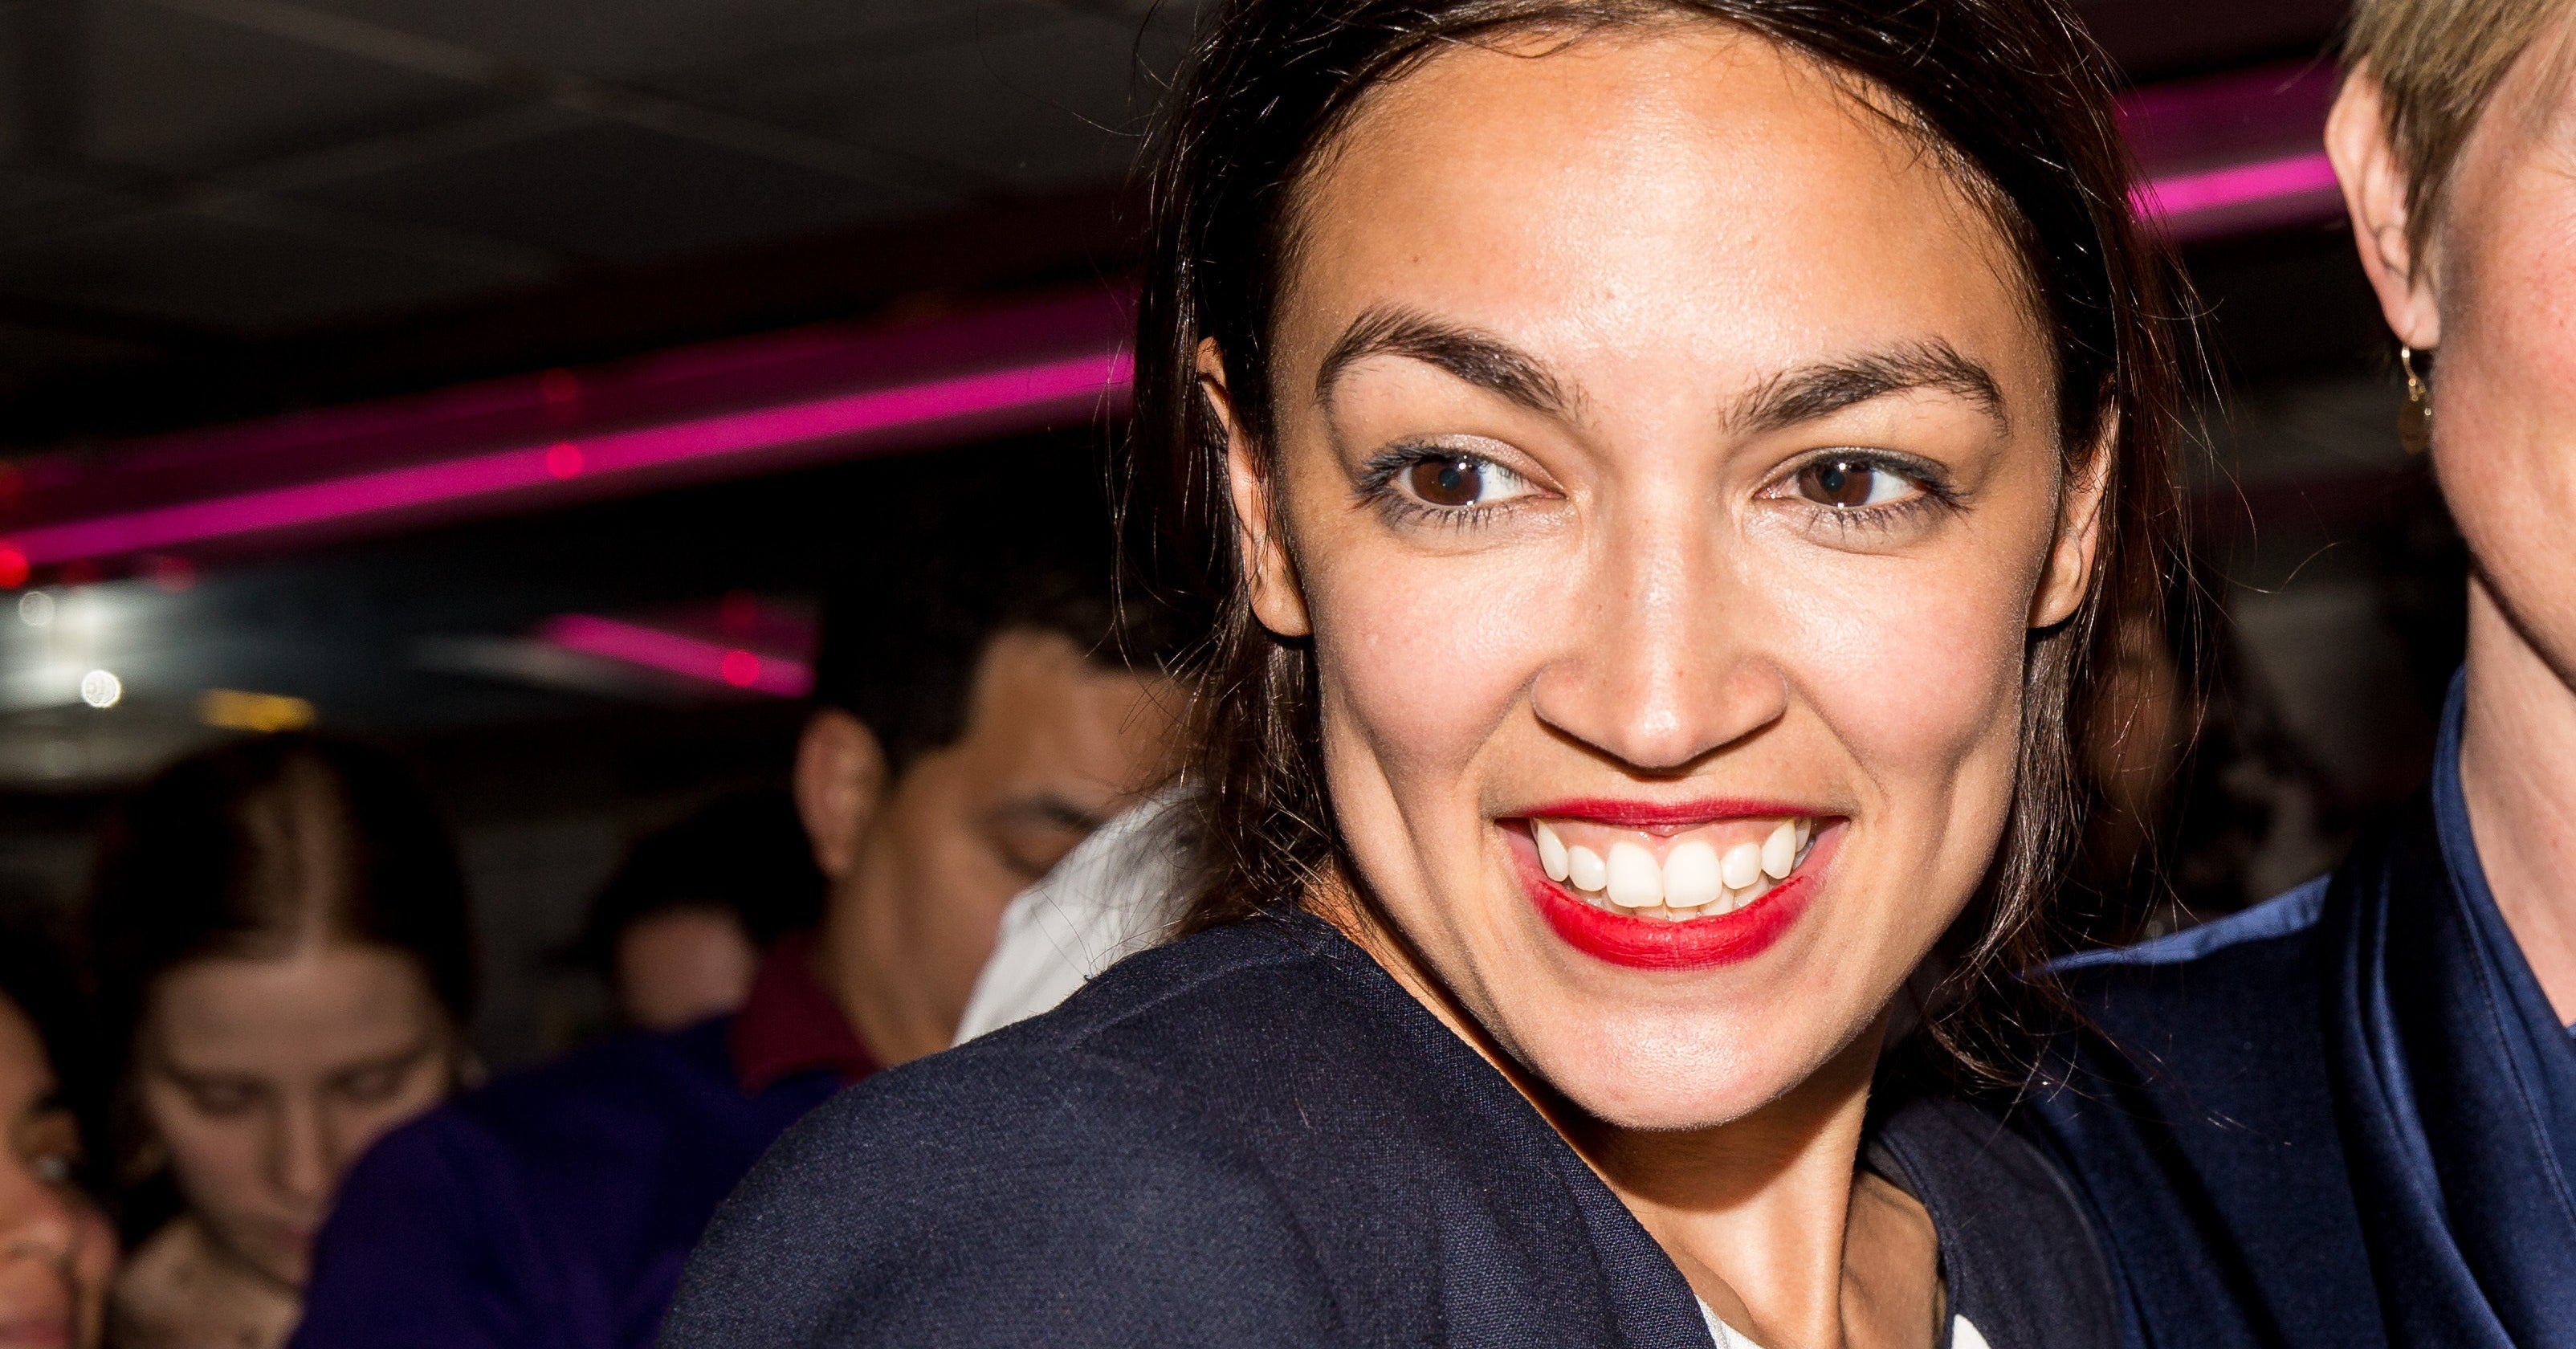 A Young Progressive Woman Beat One Of The Most Powerful Democrats In Congress